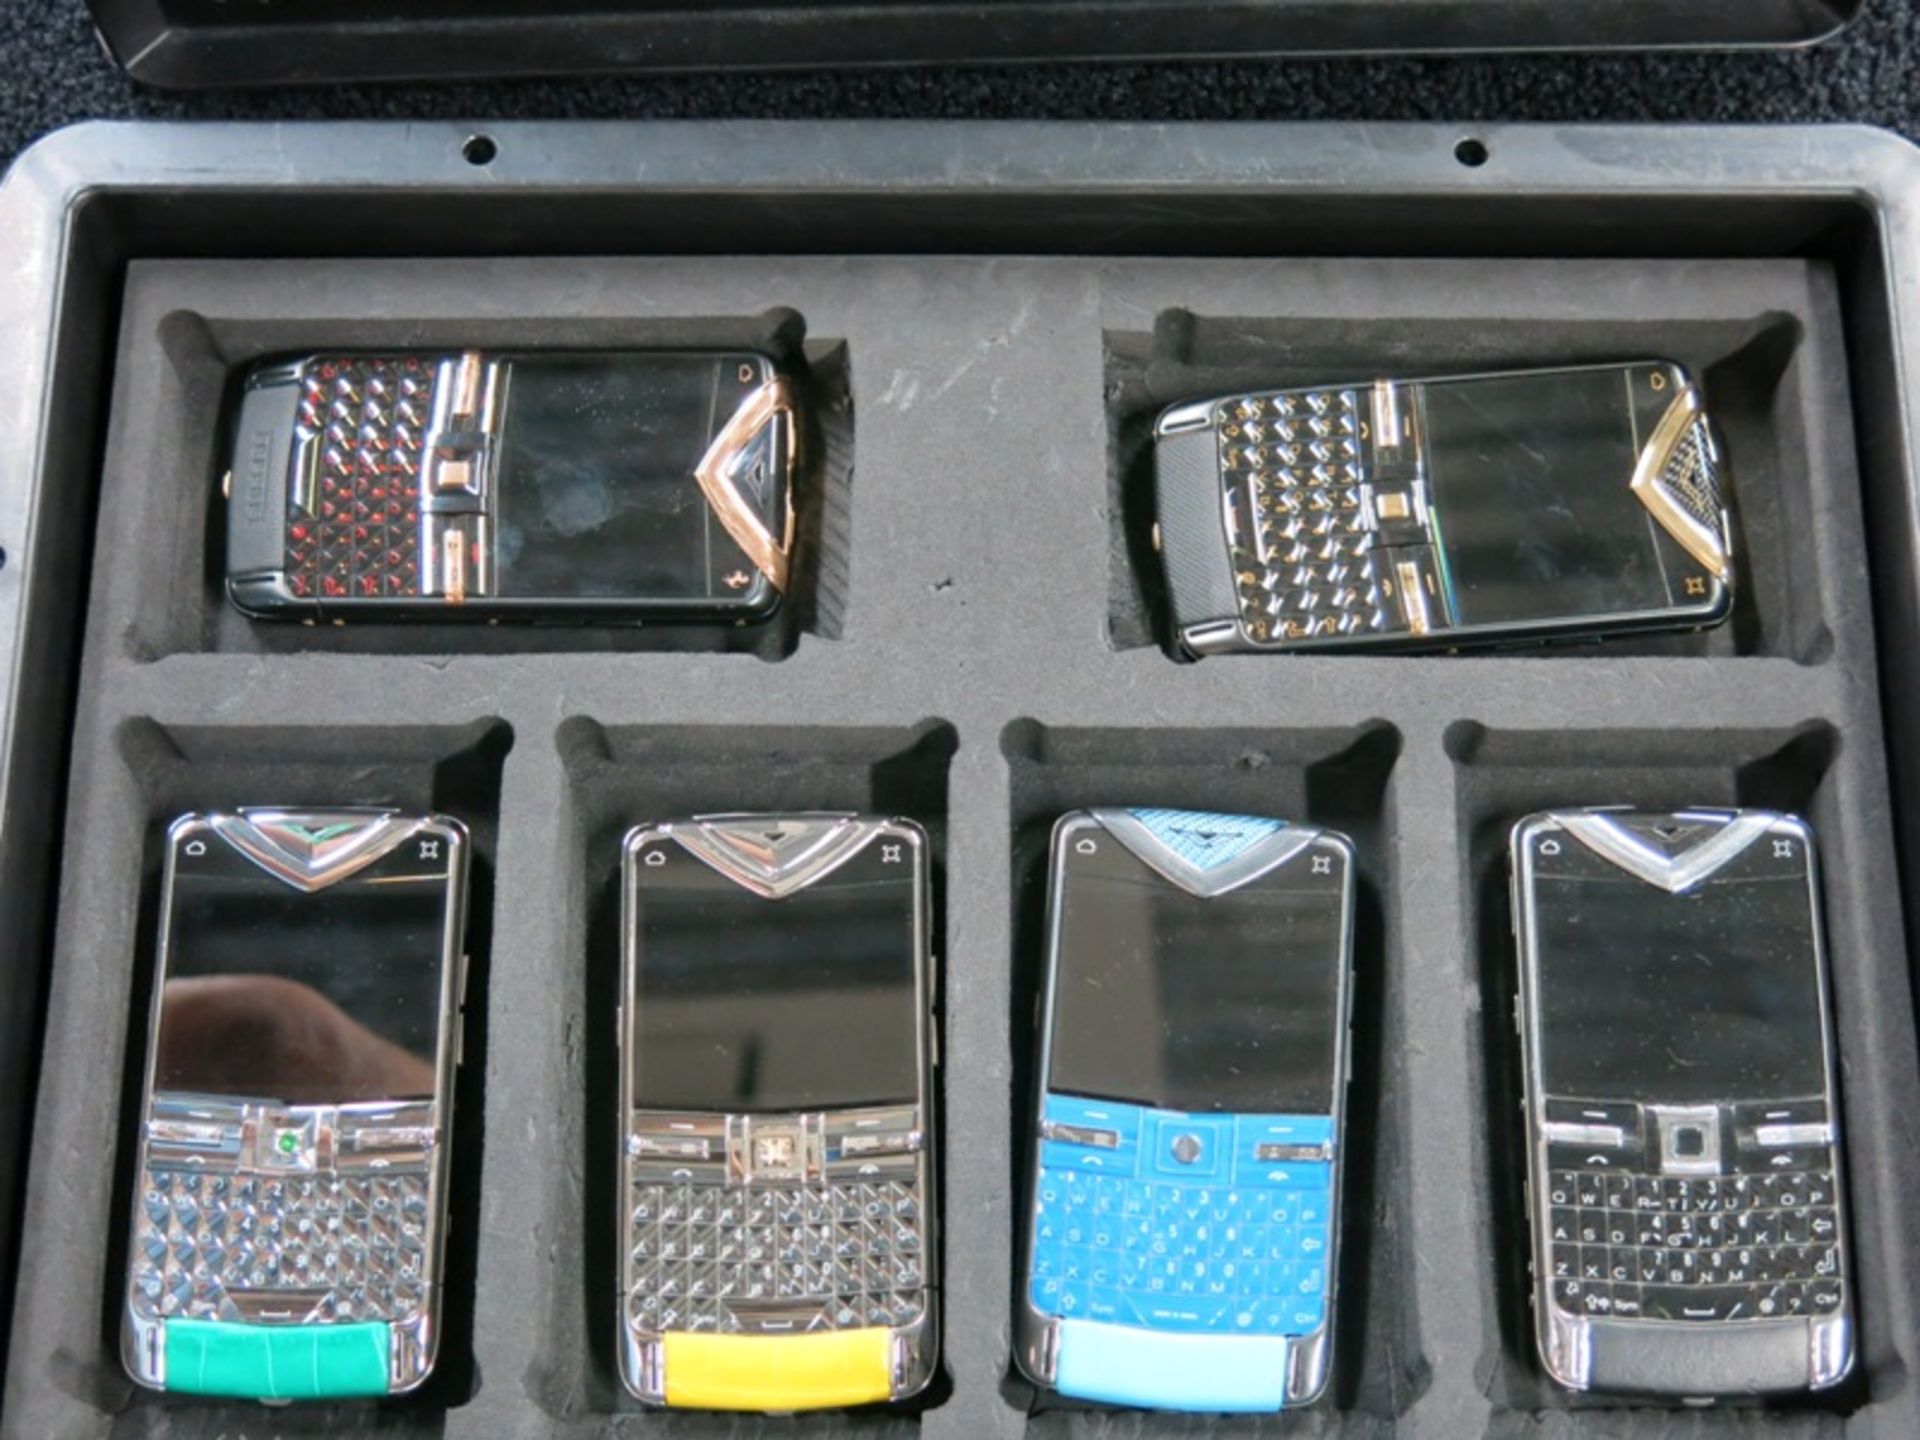 Archive Collection of 23 Vertu Constellation Quest Phones made of Stainless Steel, Ceramic Pillow, - Image 3 of 4